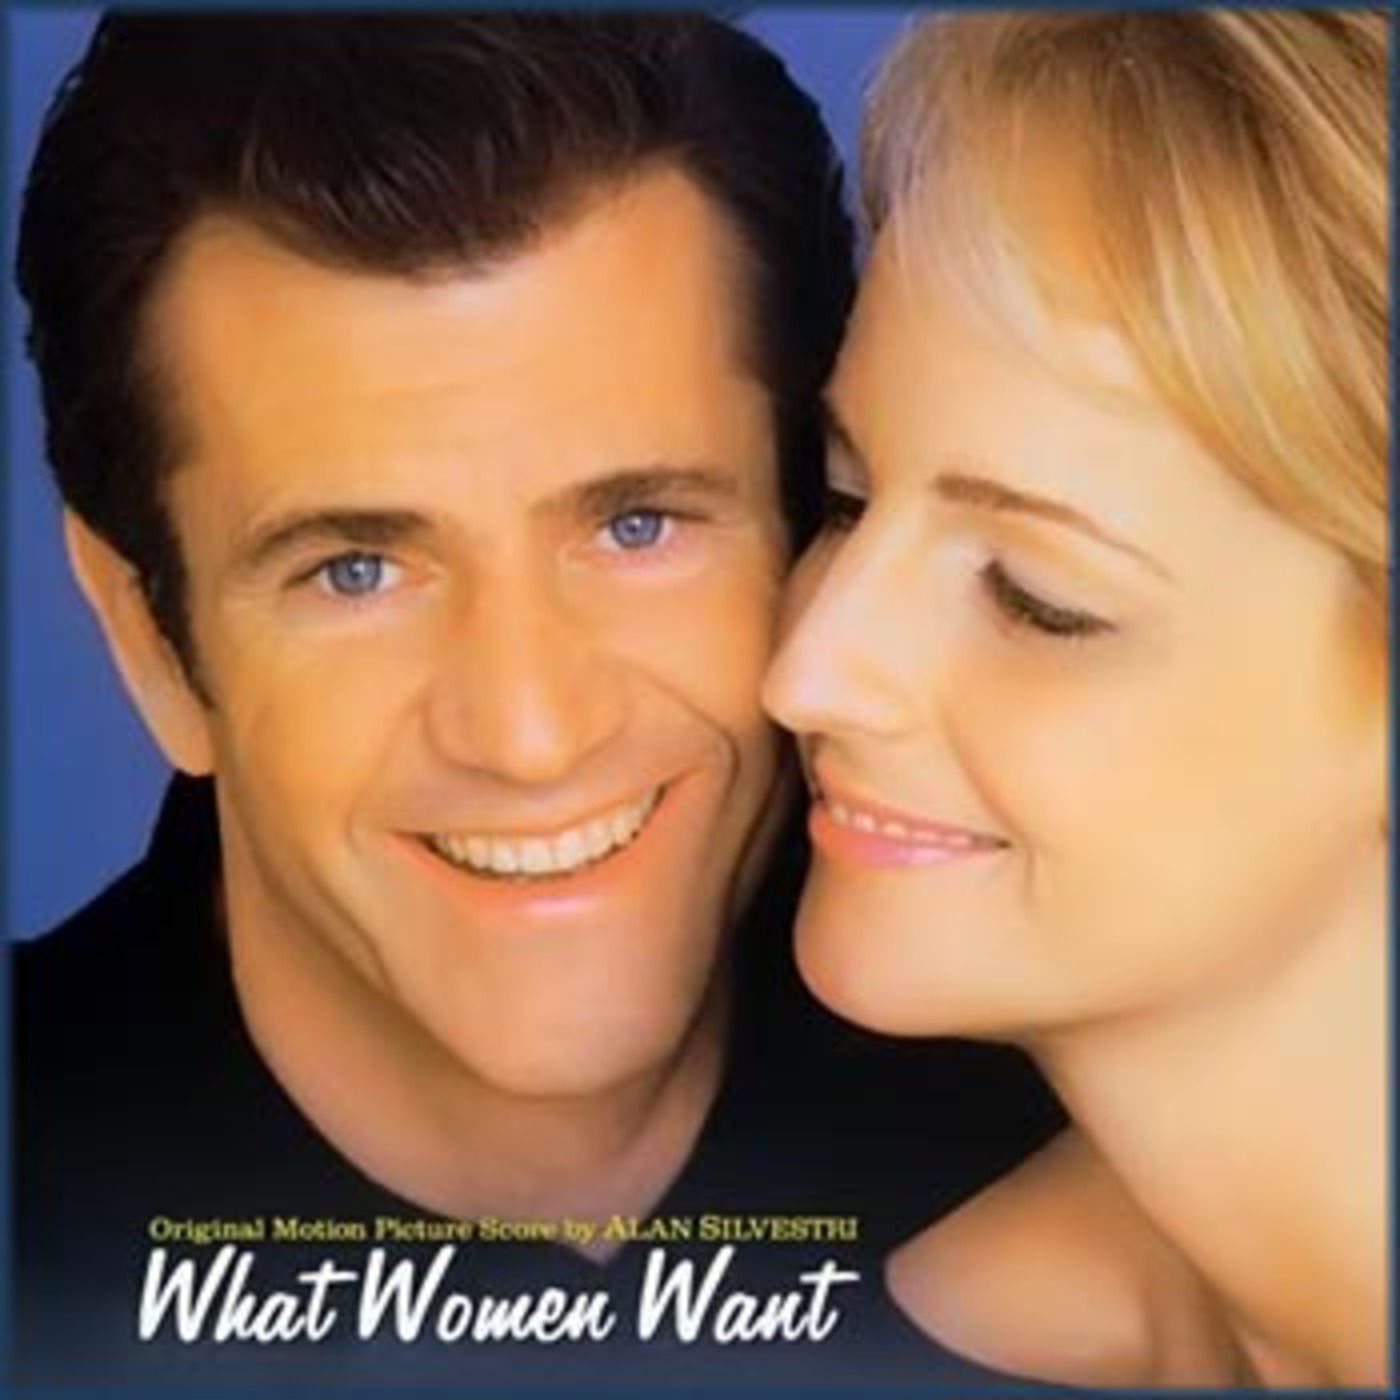 what women want soundtrack torrent